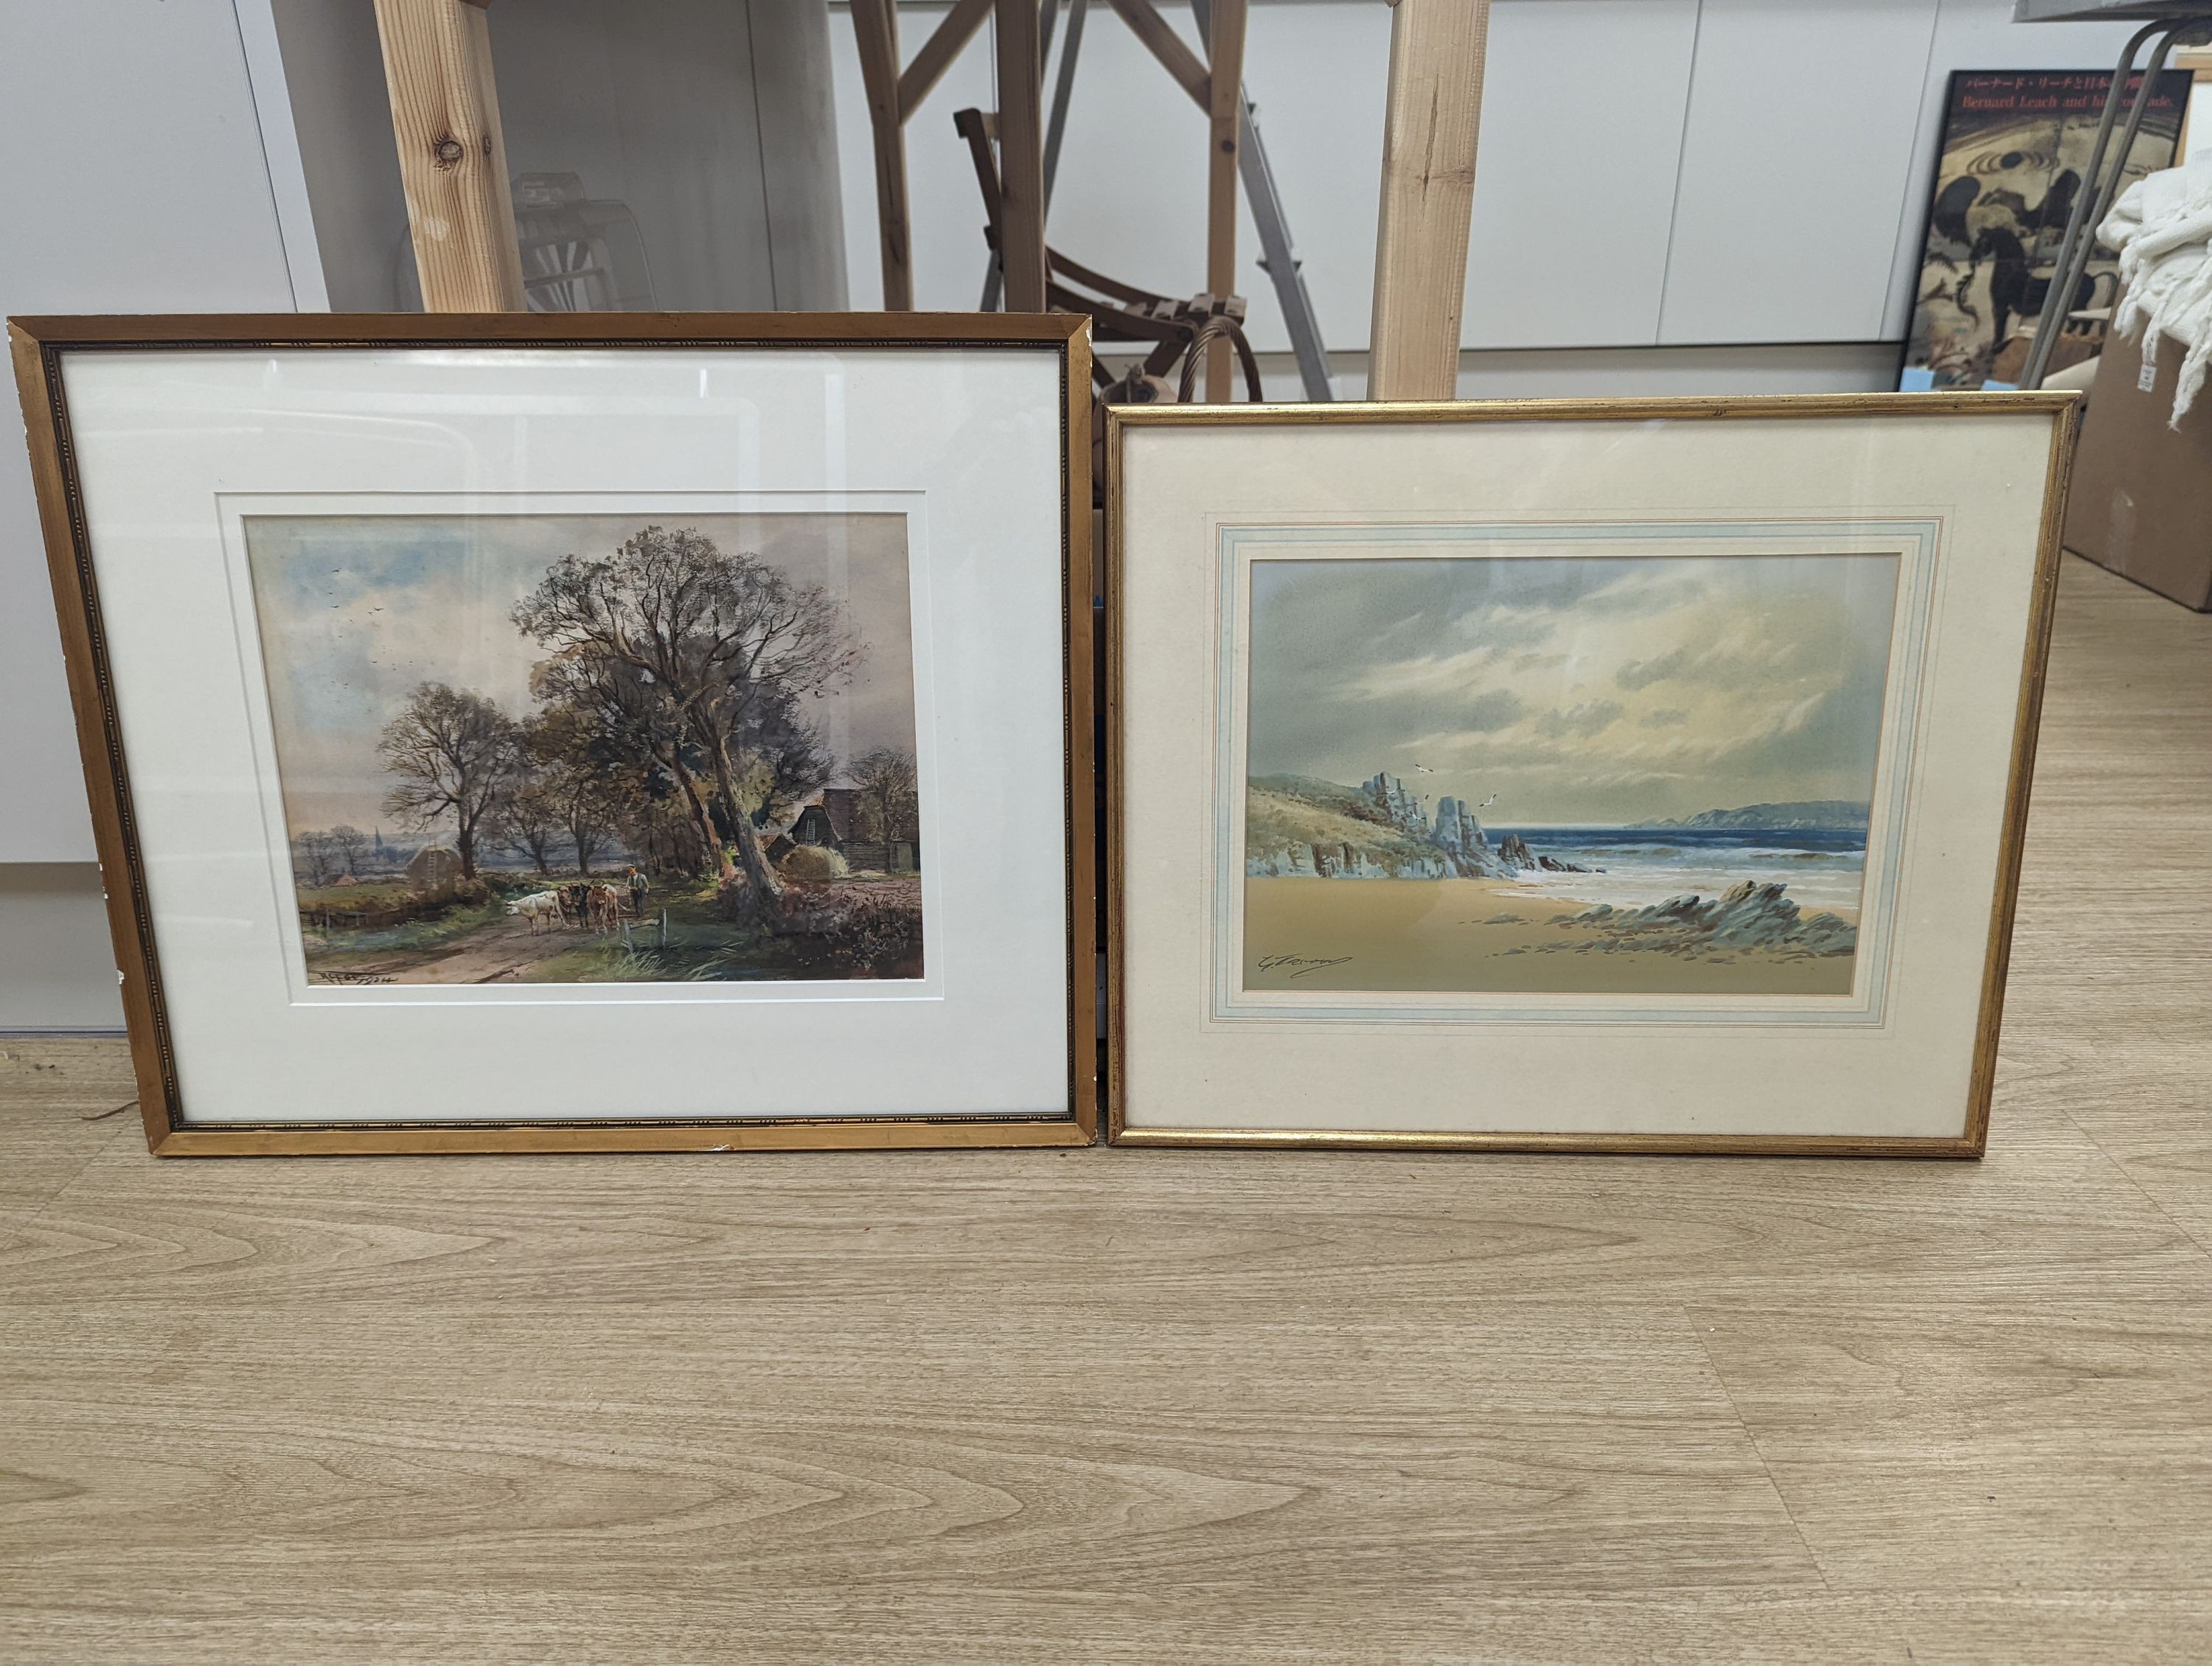 Two early 20th century watercolours depicting seascape and cattle drover, both signed, 25 x 35cm, 27 x 26cm